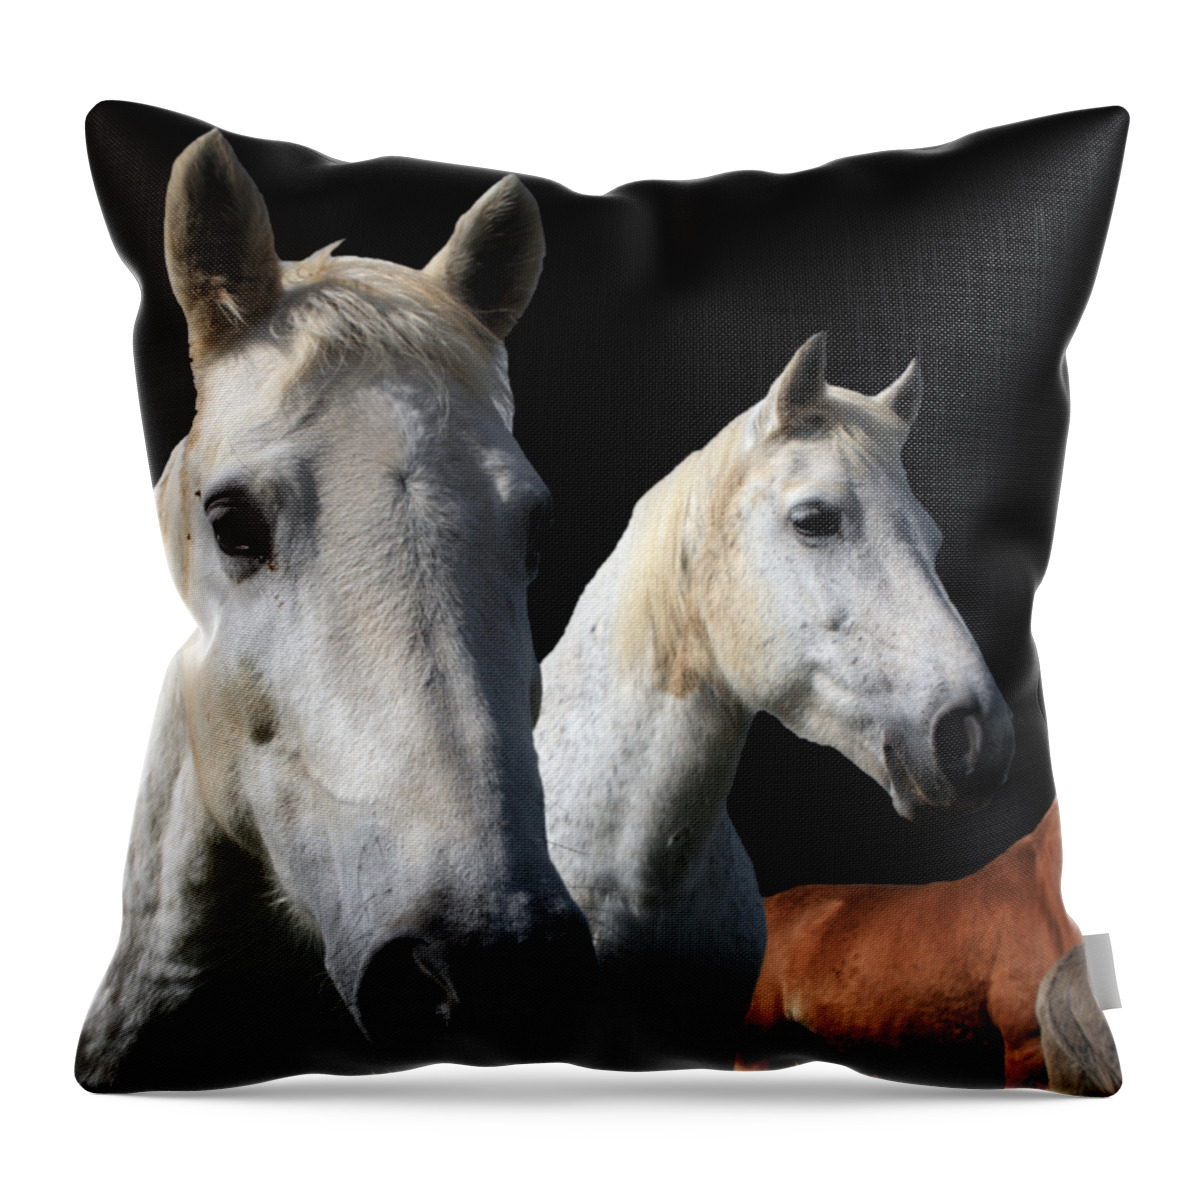 Horses Throw Pillow featuring the photograph White Camargue Horses On Black Background by Aidan Moran